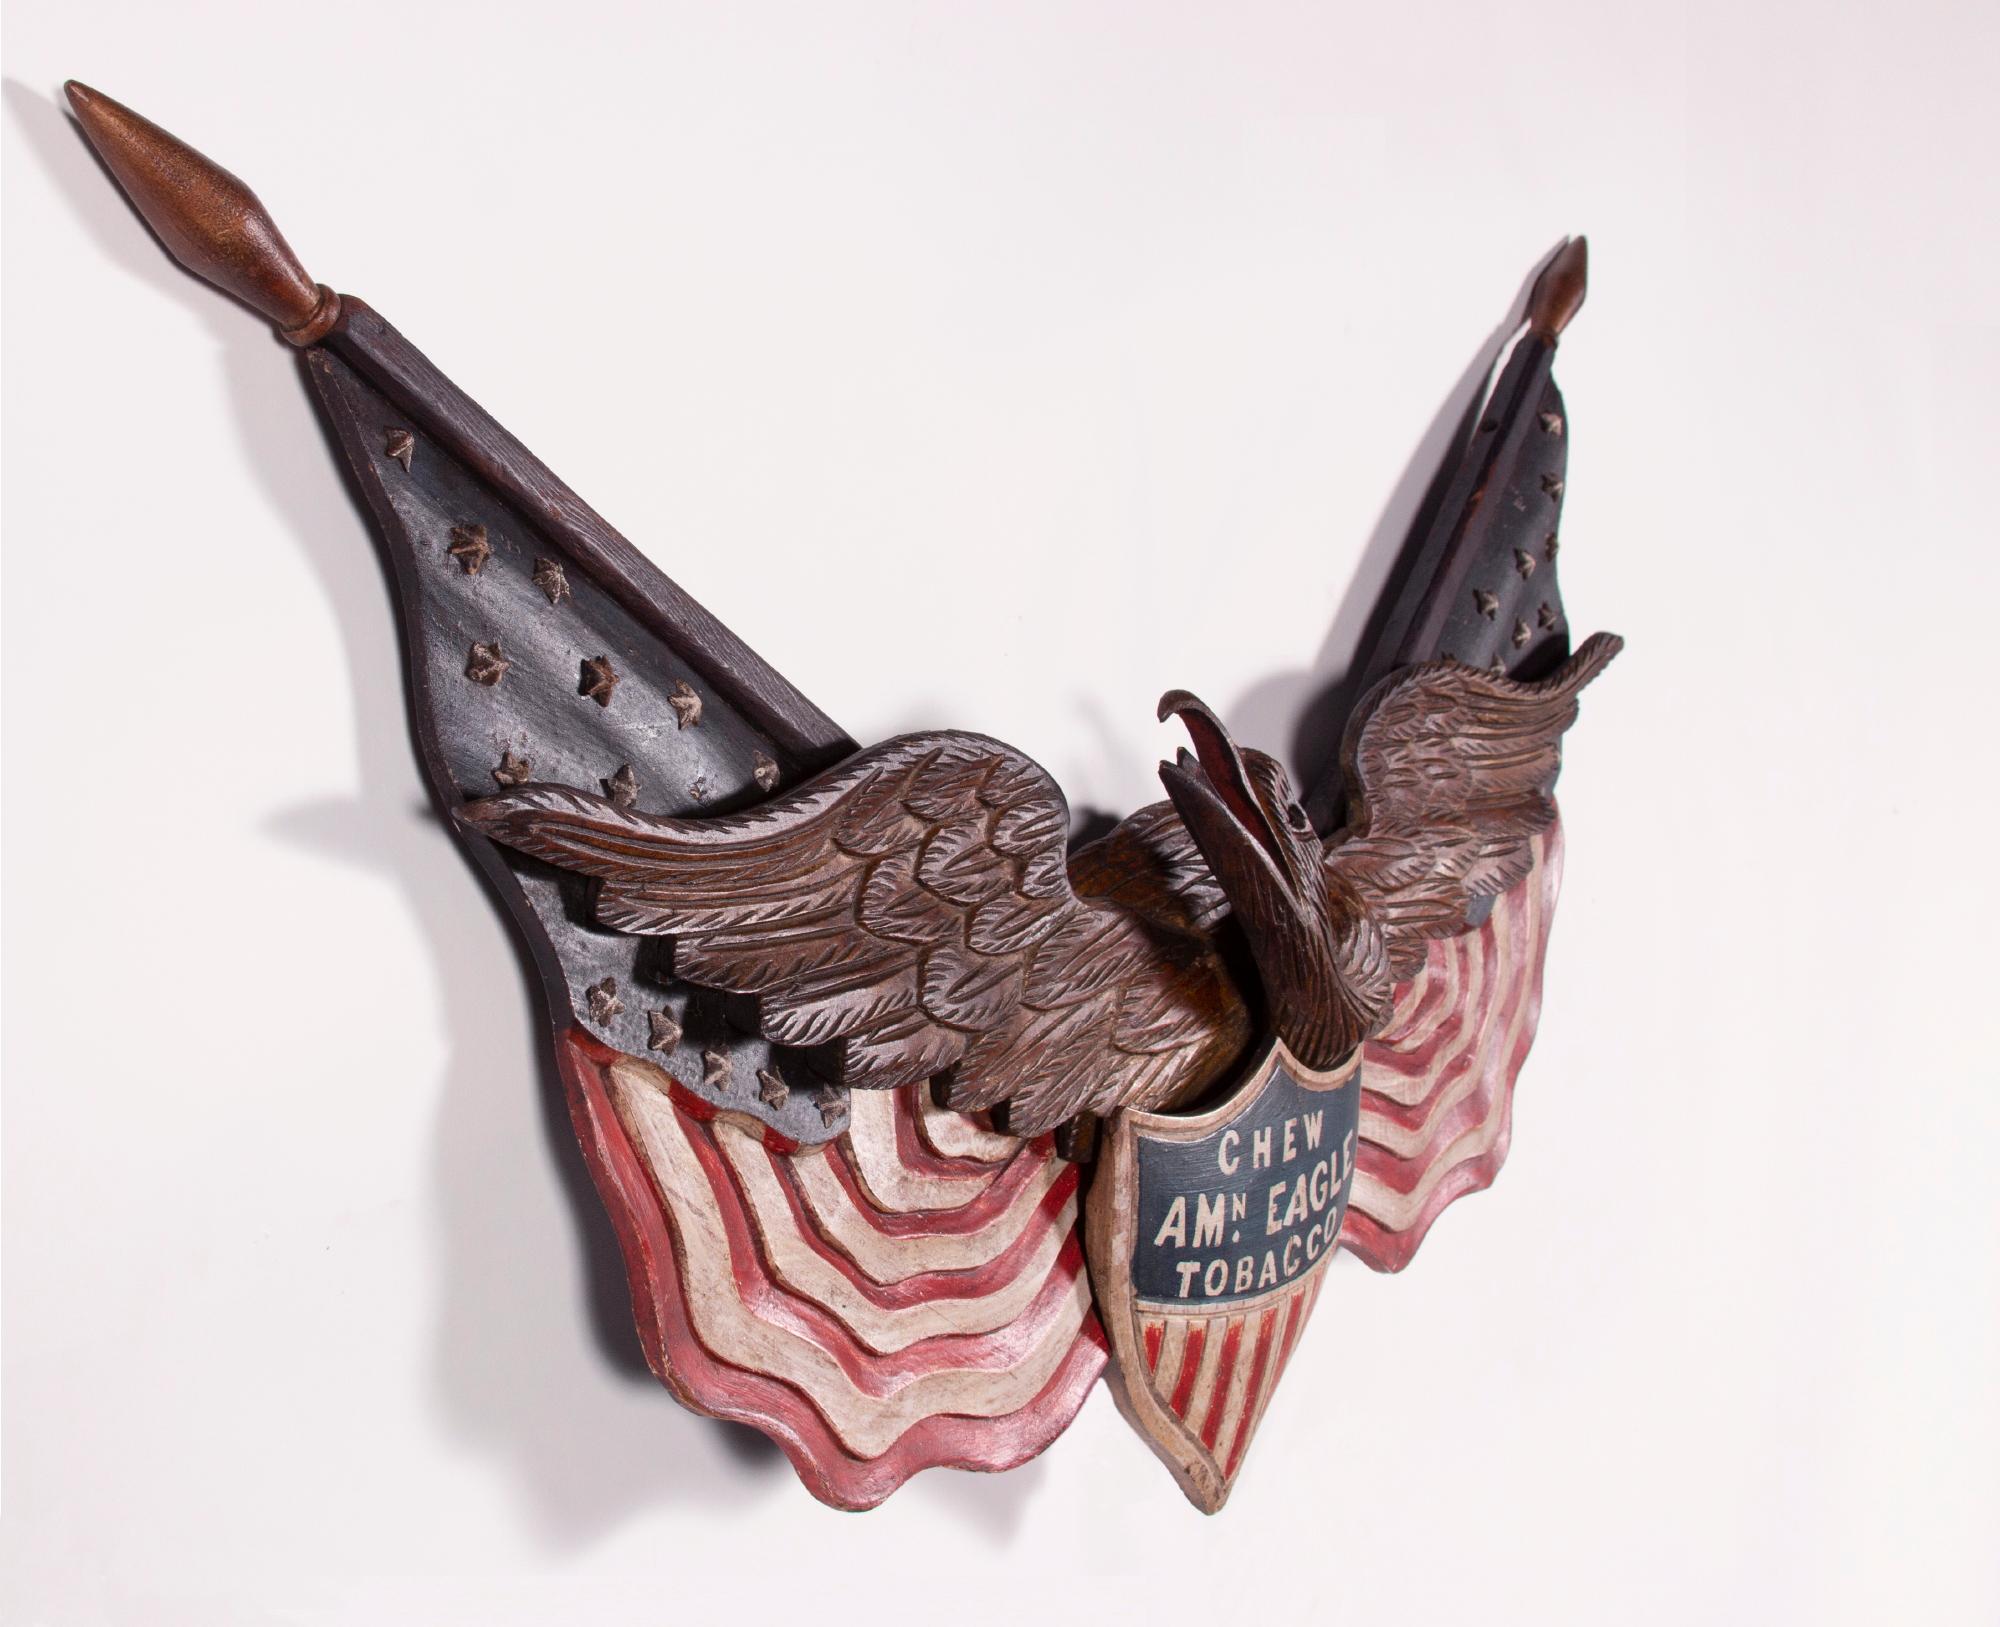 Carved eagle by George Stapf, Harrisburg, Pennsylvania, an exceptional example with two outstretched American flags and a federal shield, one of just two known examples with commercial advertising, made circa 1890-WWI

Patriotic eagle by